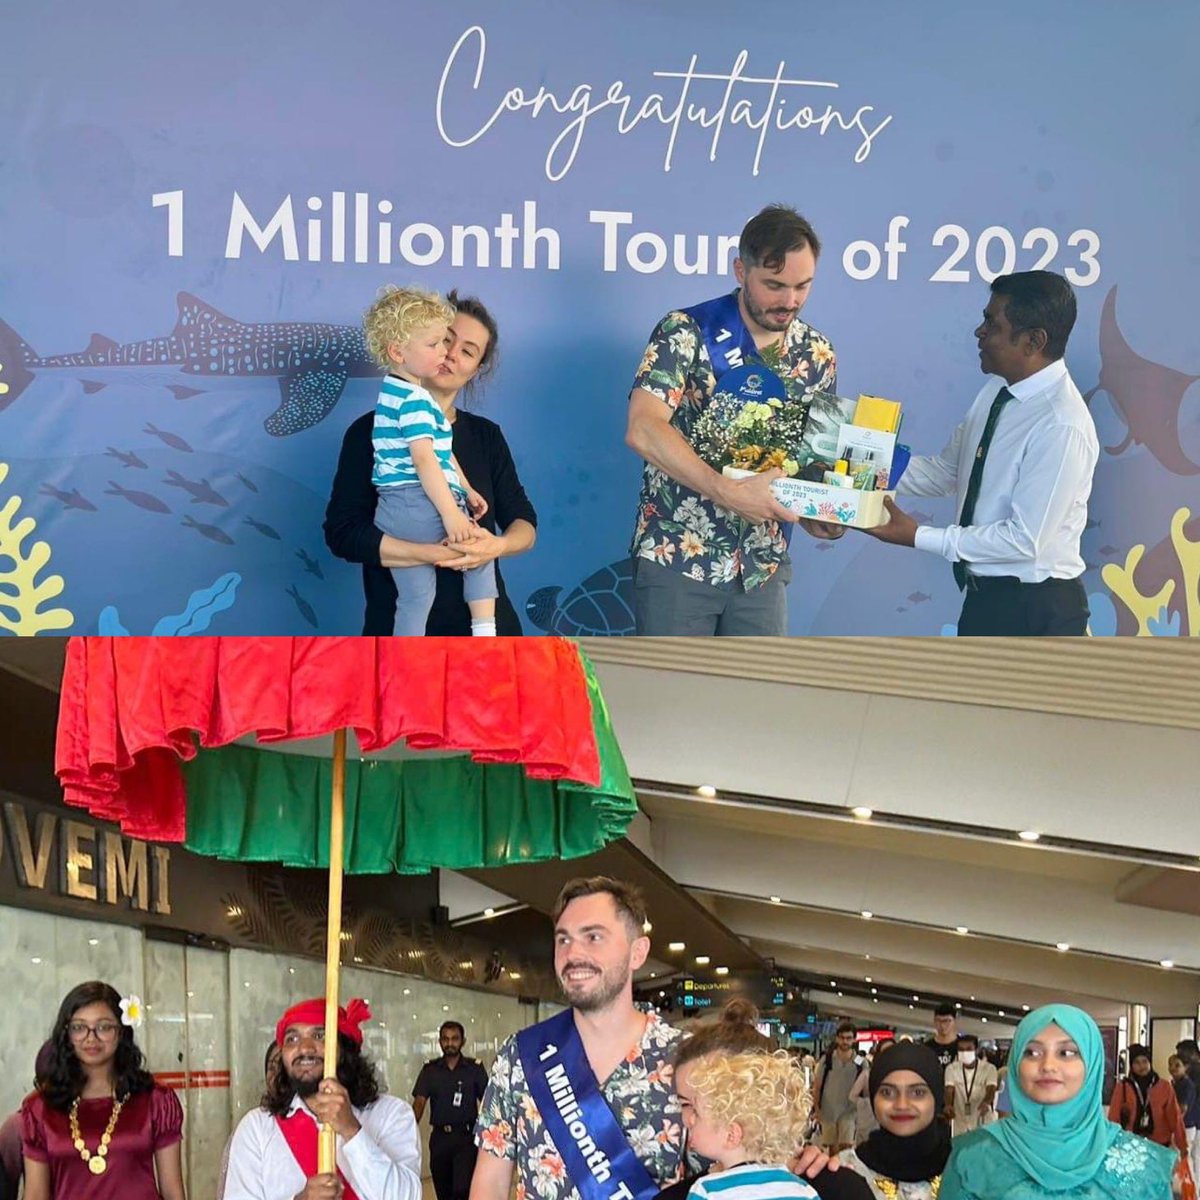 Welcome to the Maldives Mr. Anton Pavlov, the 1 millionth tourist of 2023. We hope you have a wonderful time in the Sunny Side of Life! 

#WorldsLeadingDestination2022 #Maldives #VisitMaldives #SunnySideOfLife